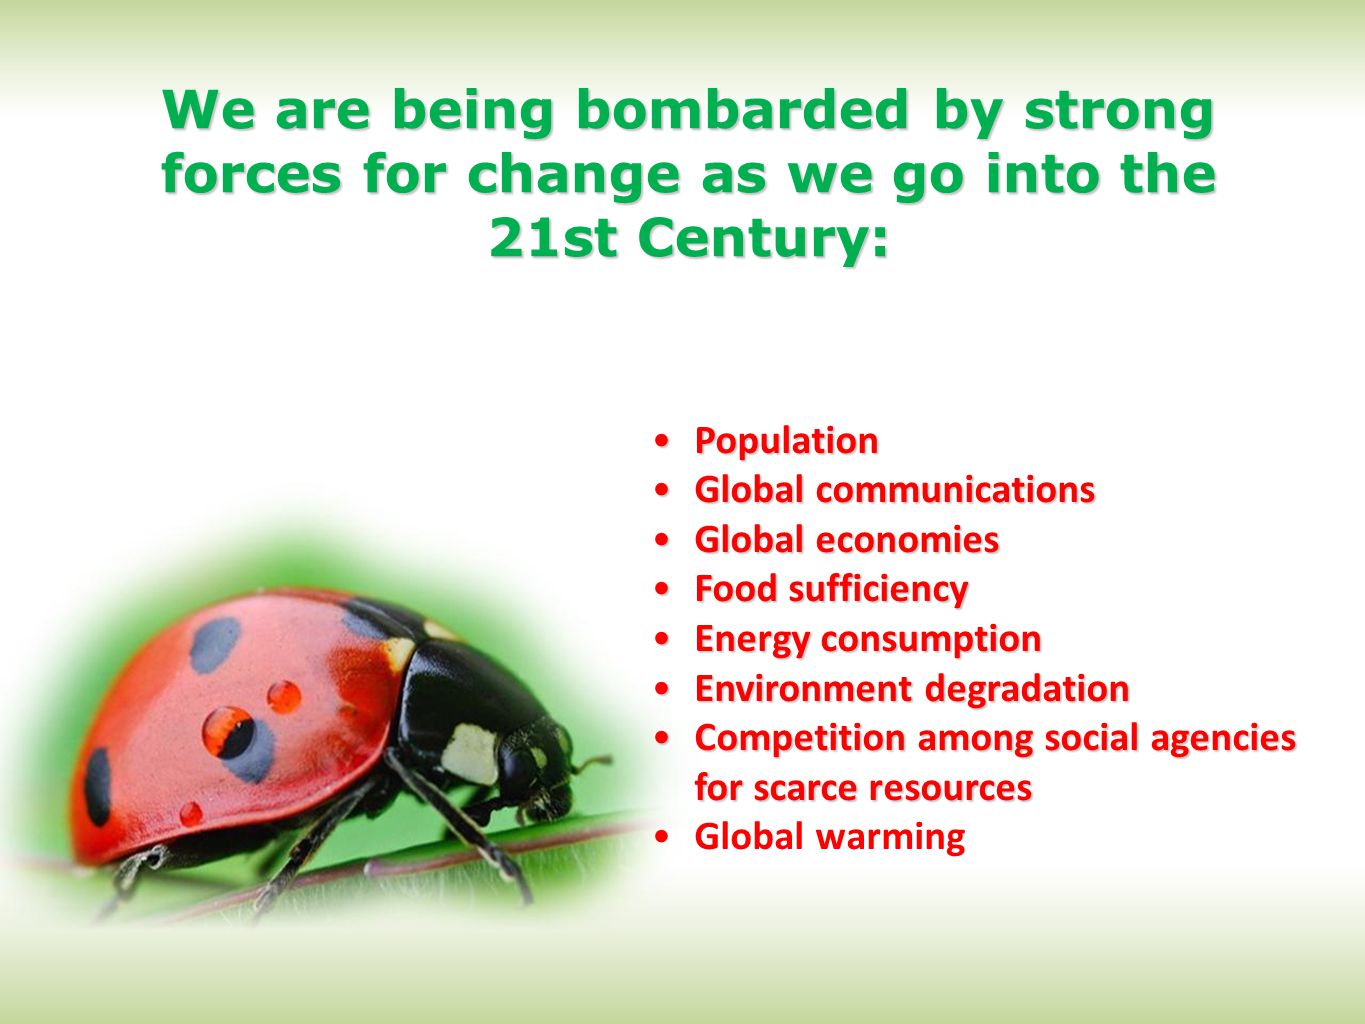 We are being bombarded by strong forces for change as we go into the 21st Century: